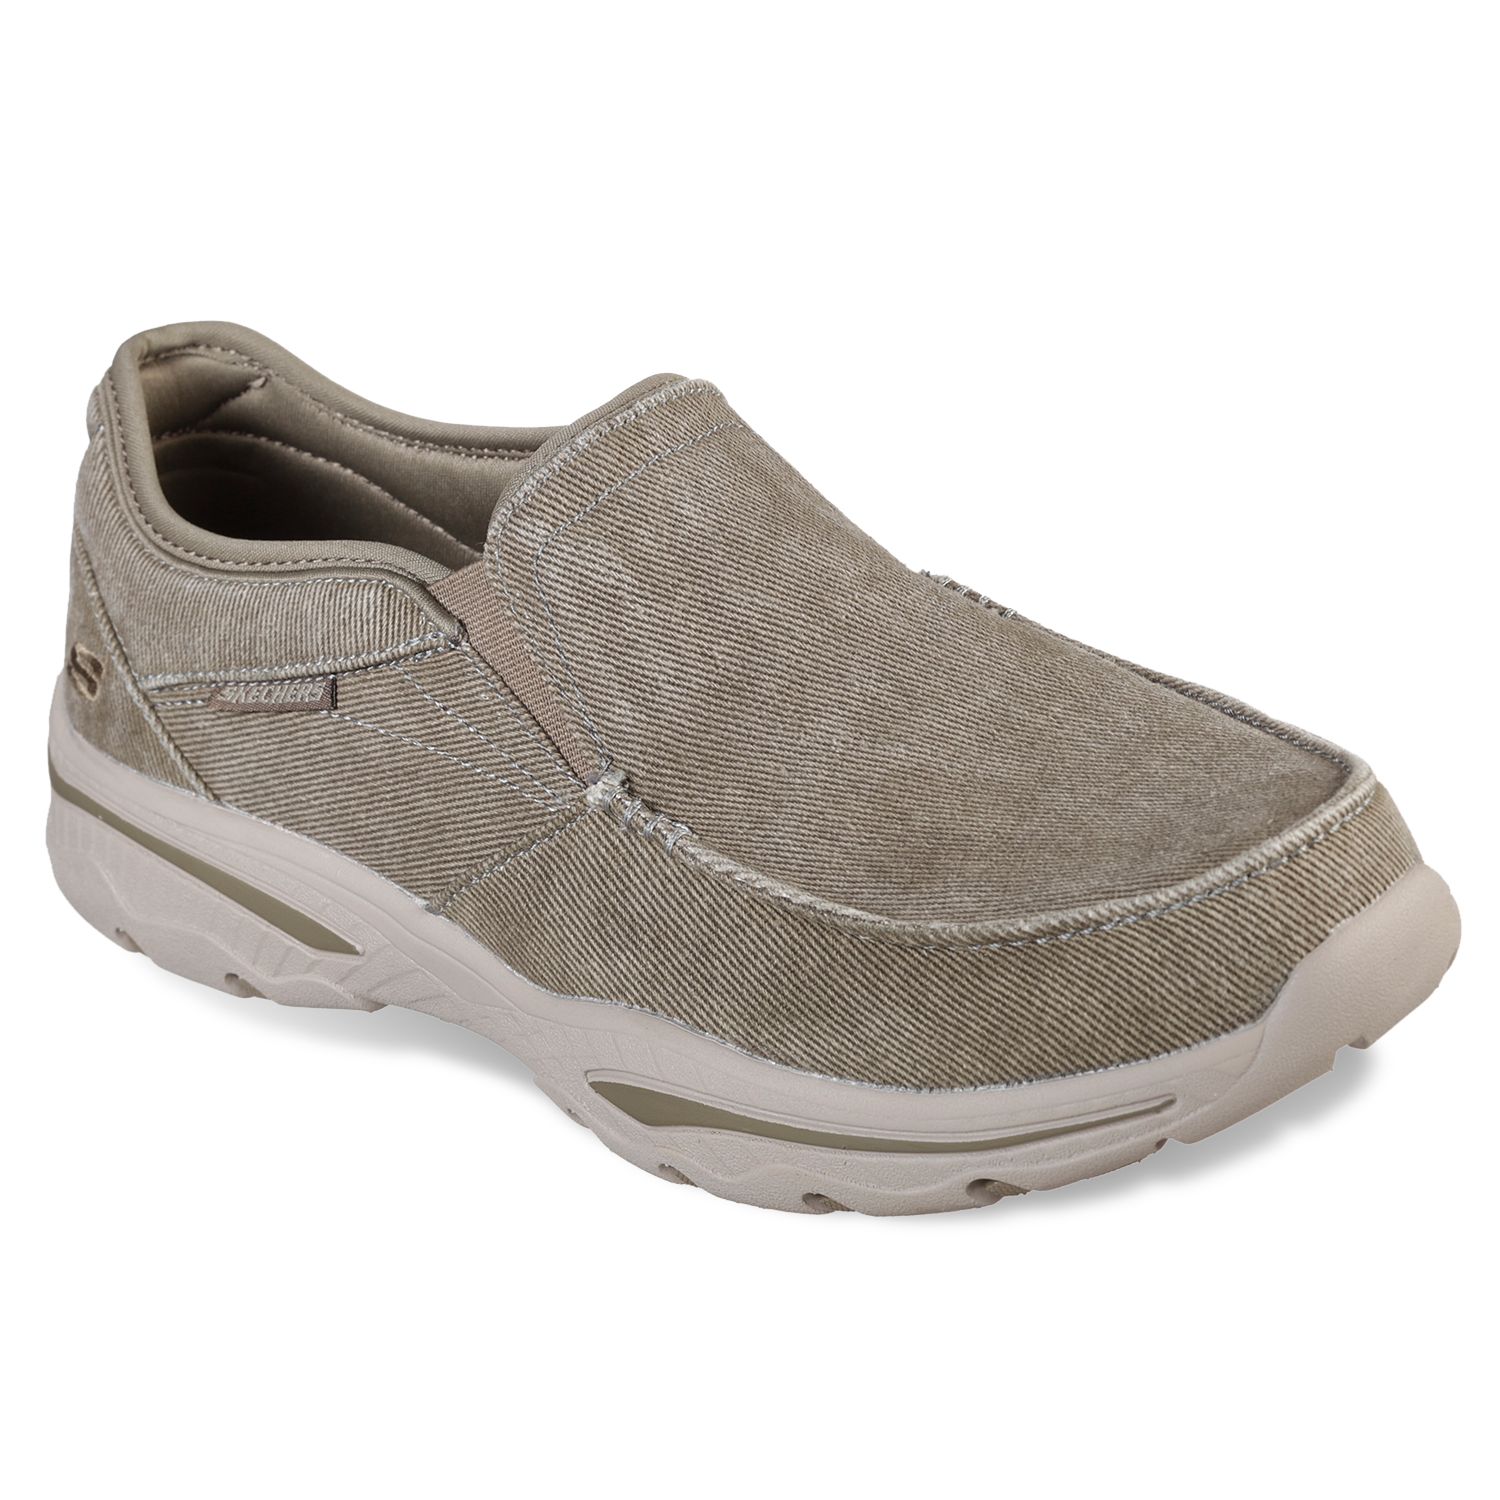 skechers relaxed fit mens review